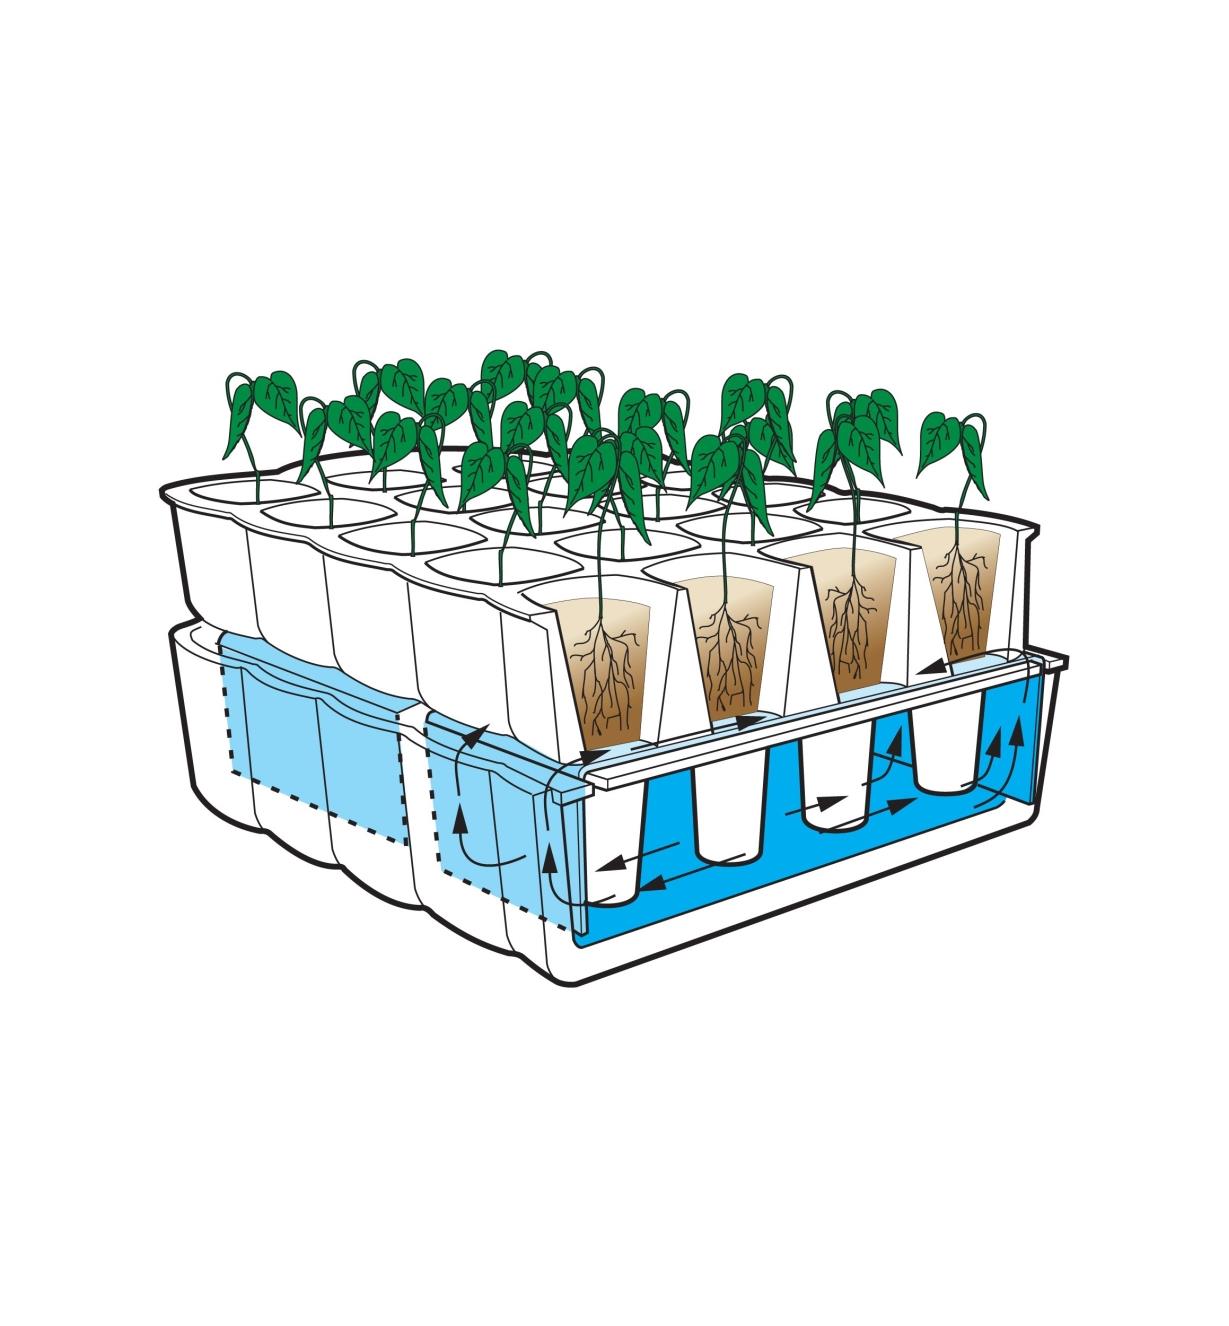 Diagram demonstrating how seedlings receive water through the capillary mat